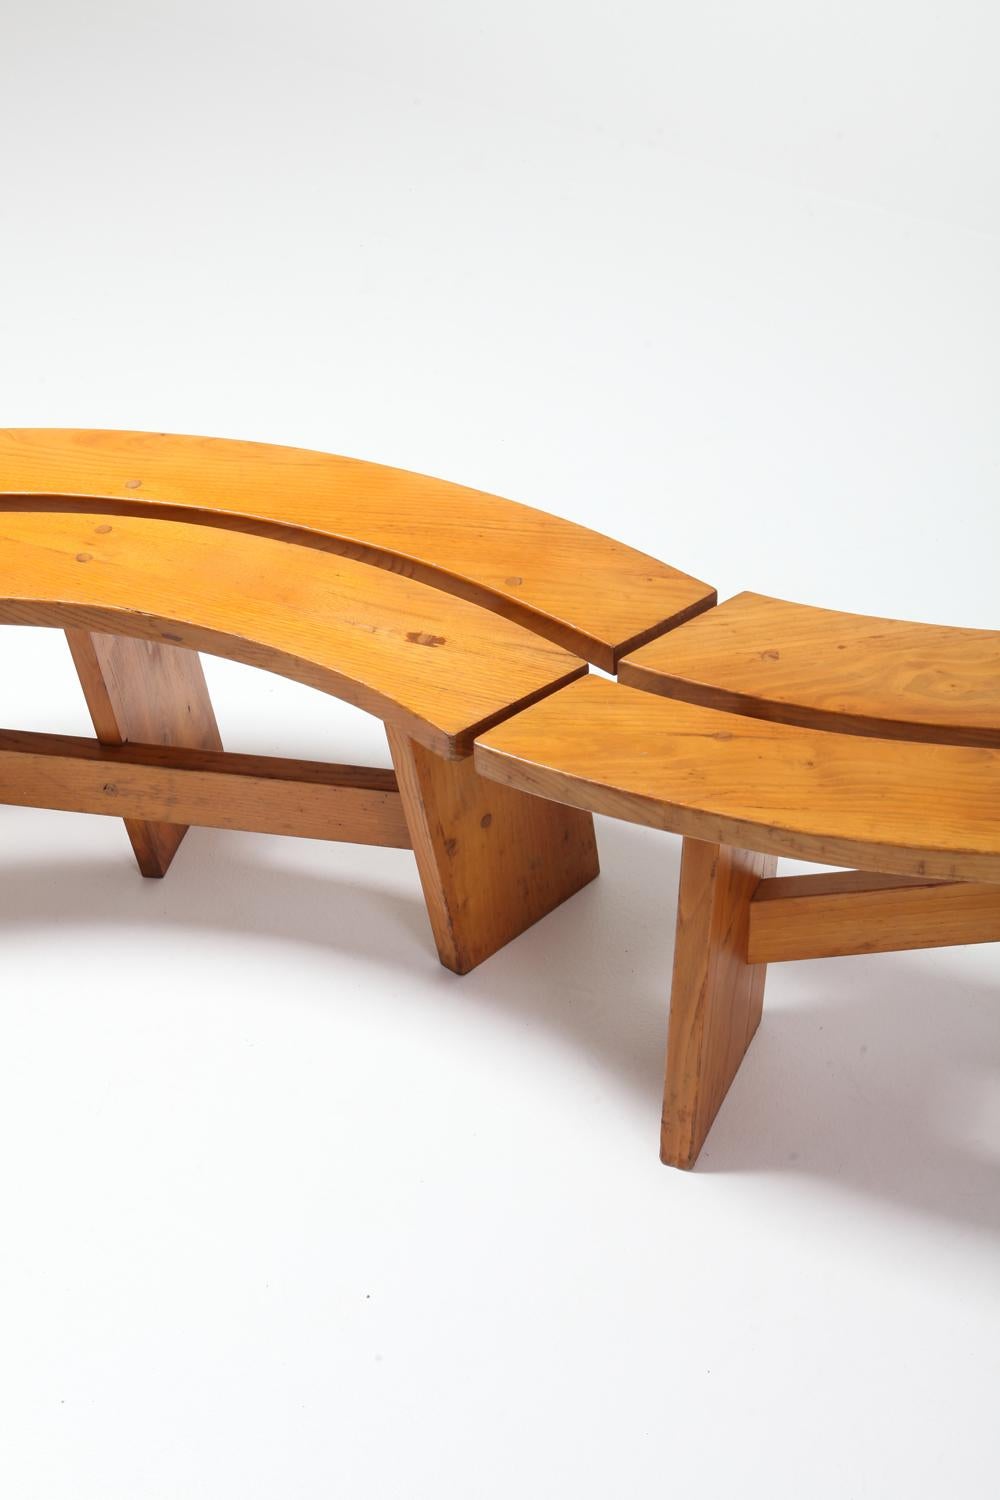 Pierre Chapo Style Curved Bench in Elmwood 6